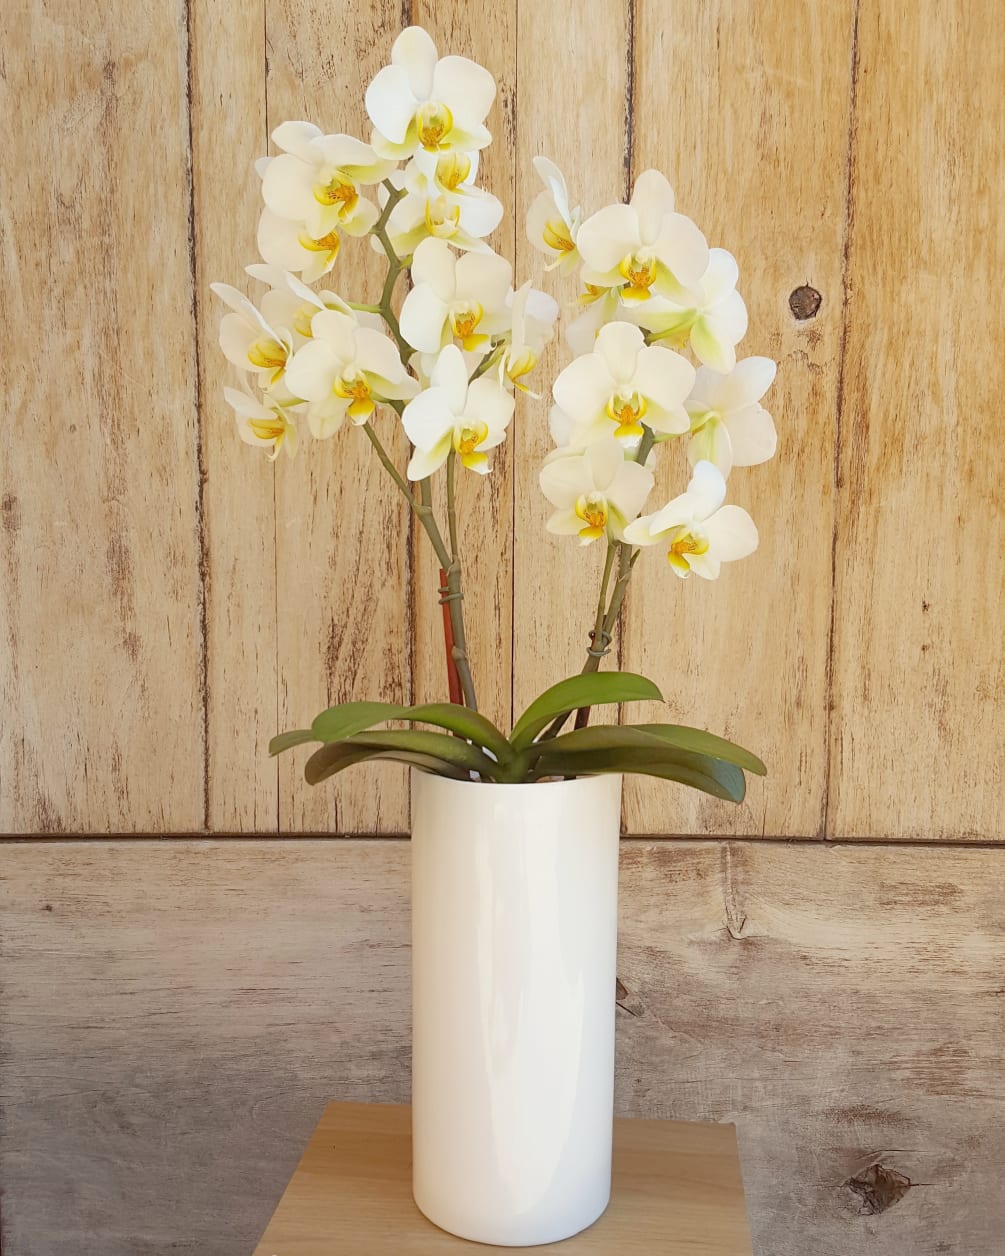 White ceramic container with a double stem Mini Orchid plant.
Container will vary